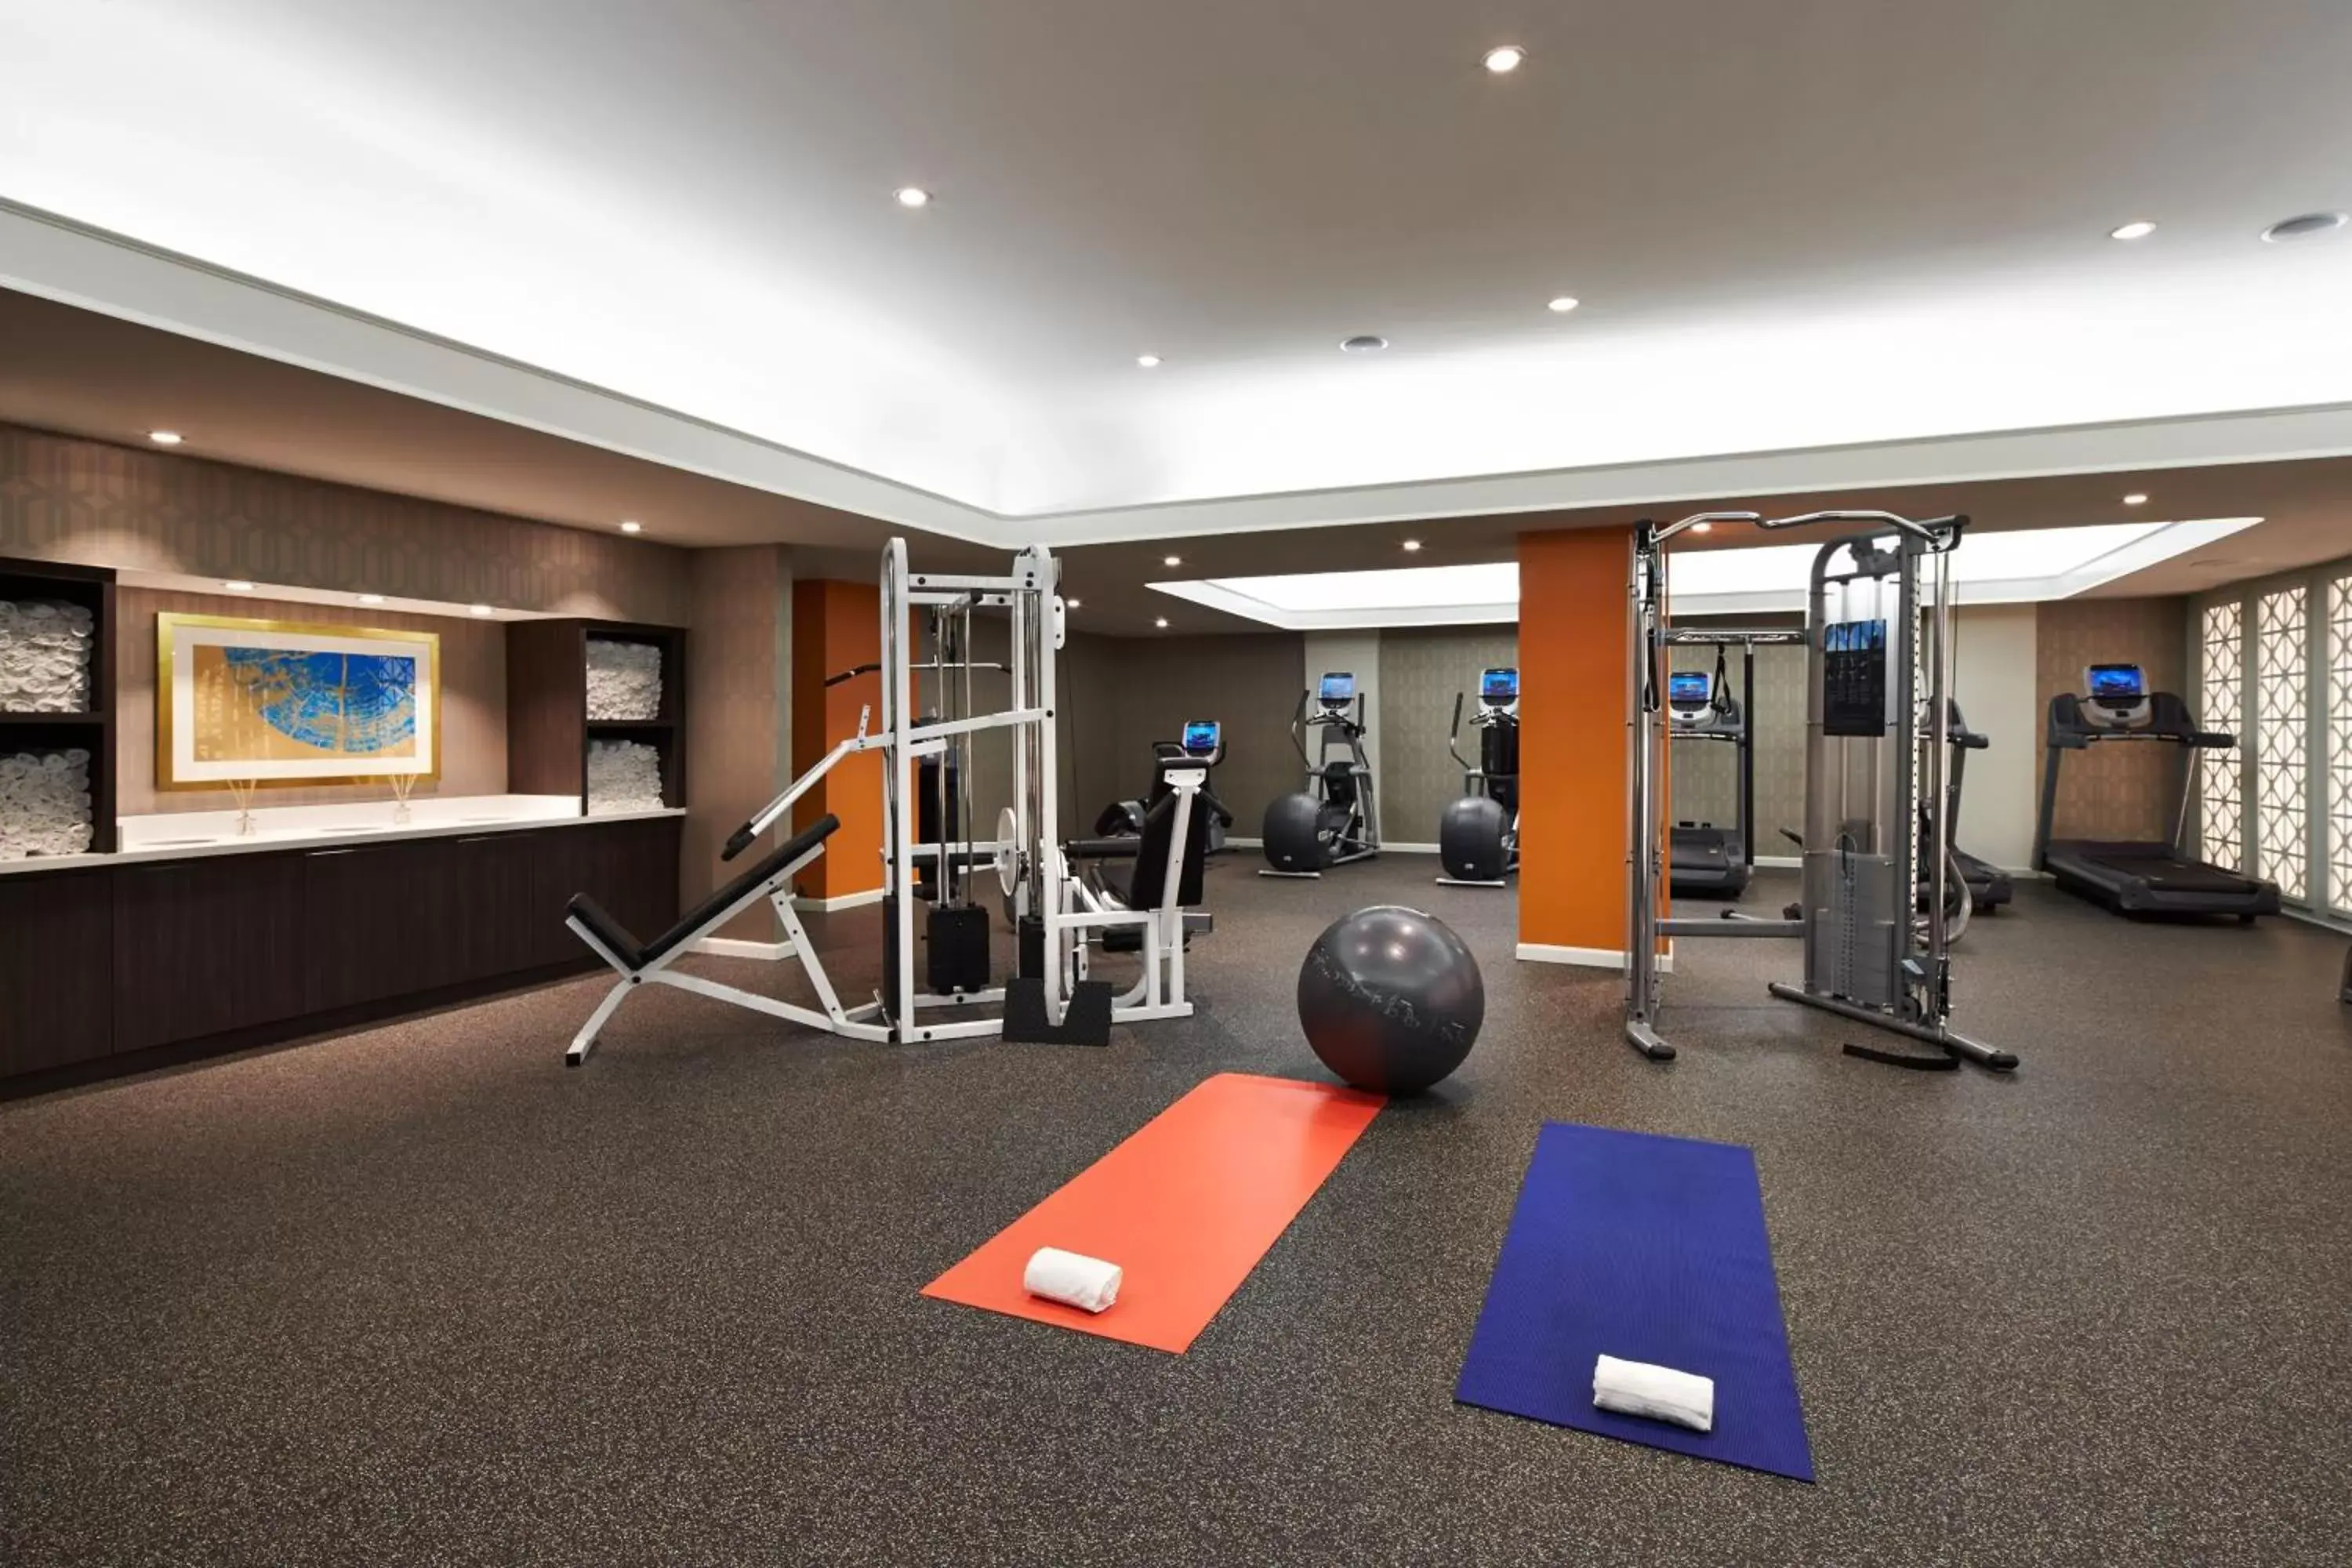 Fitness centre/facilities, Fitness Center/Facilities in The Ven at Embassy Row, Washington, D.C., a Tribute Portfolio Hotel